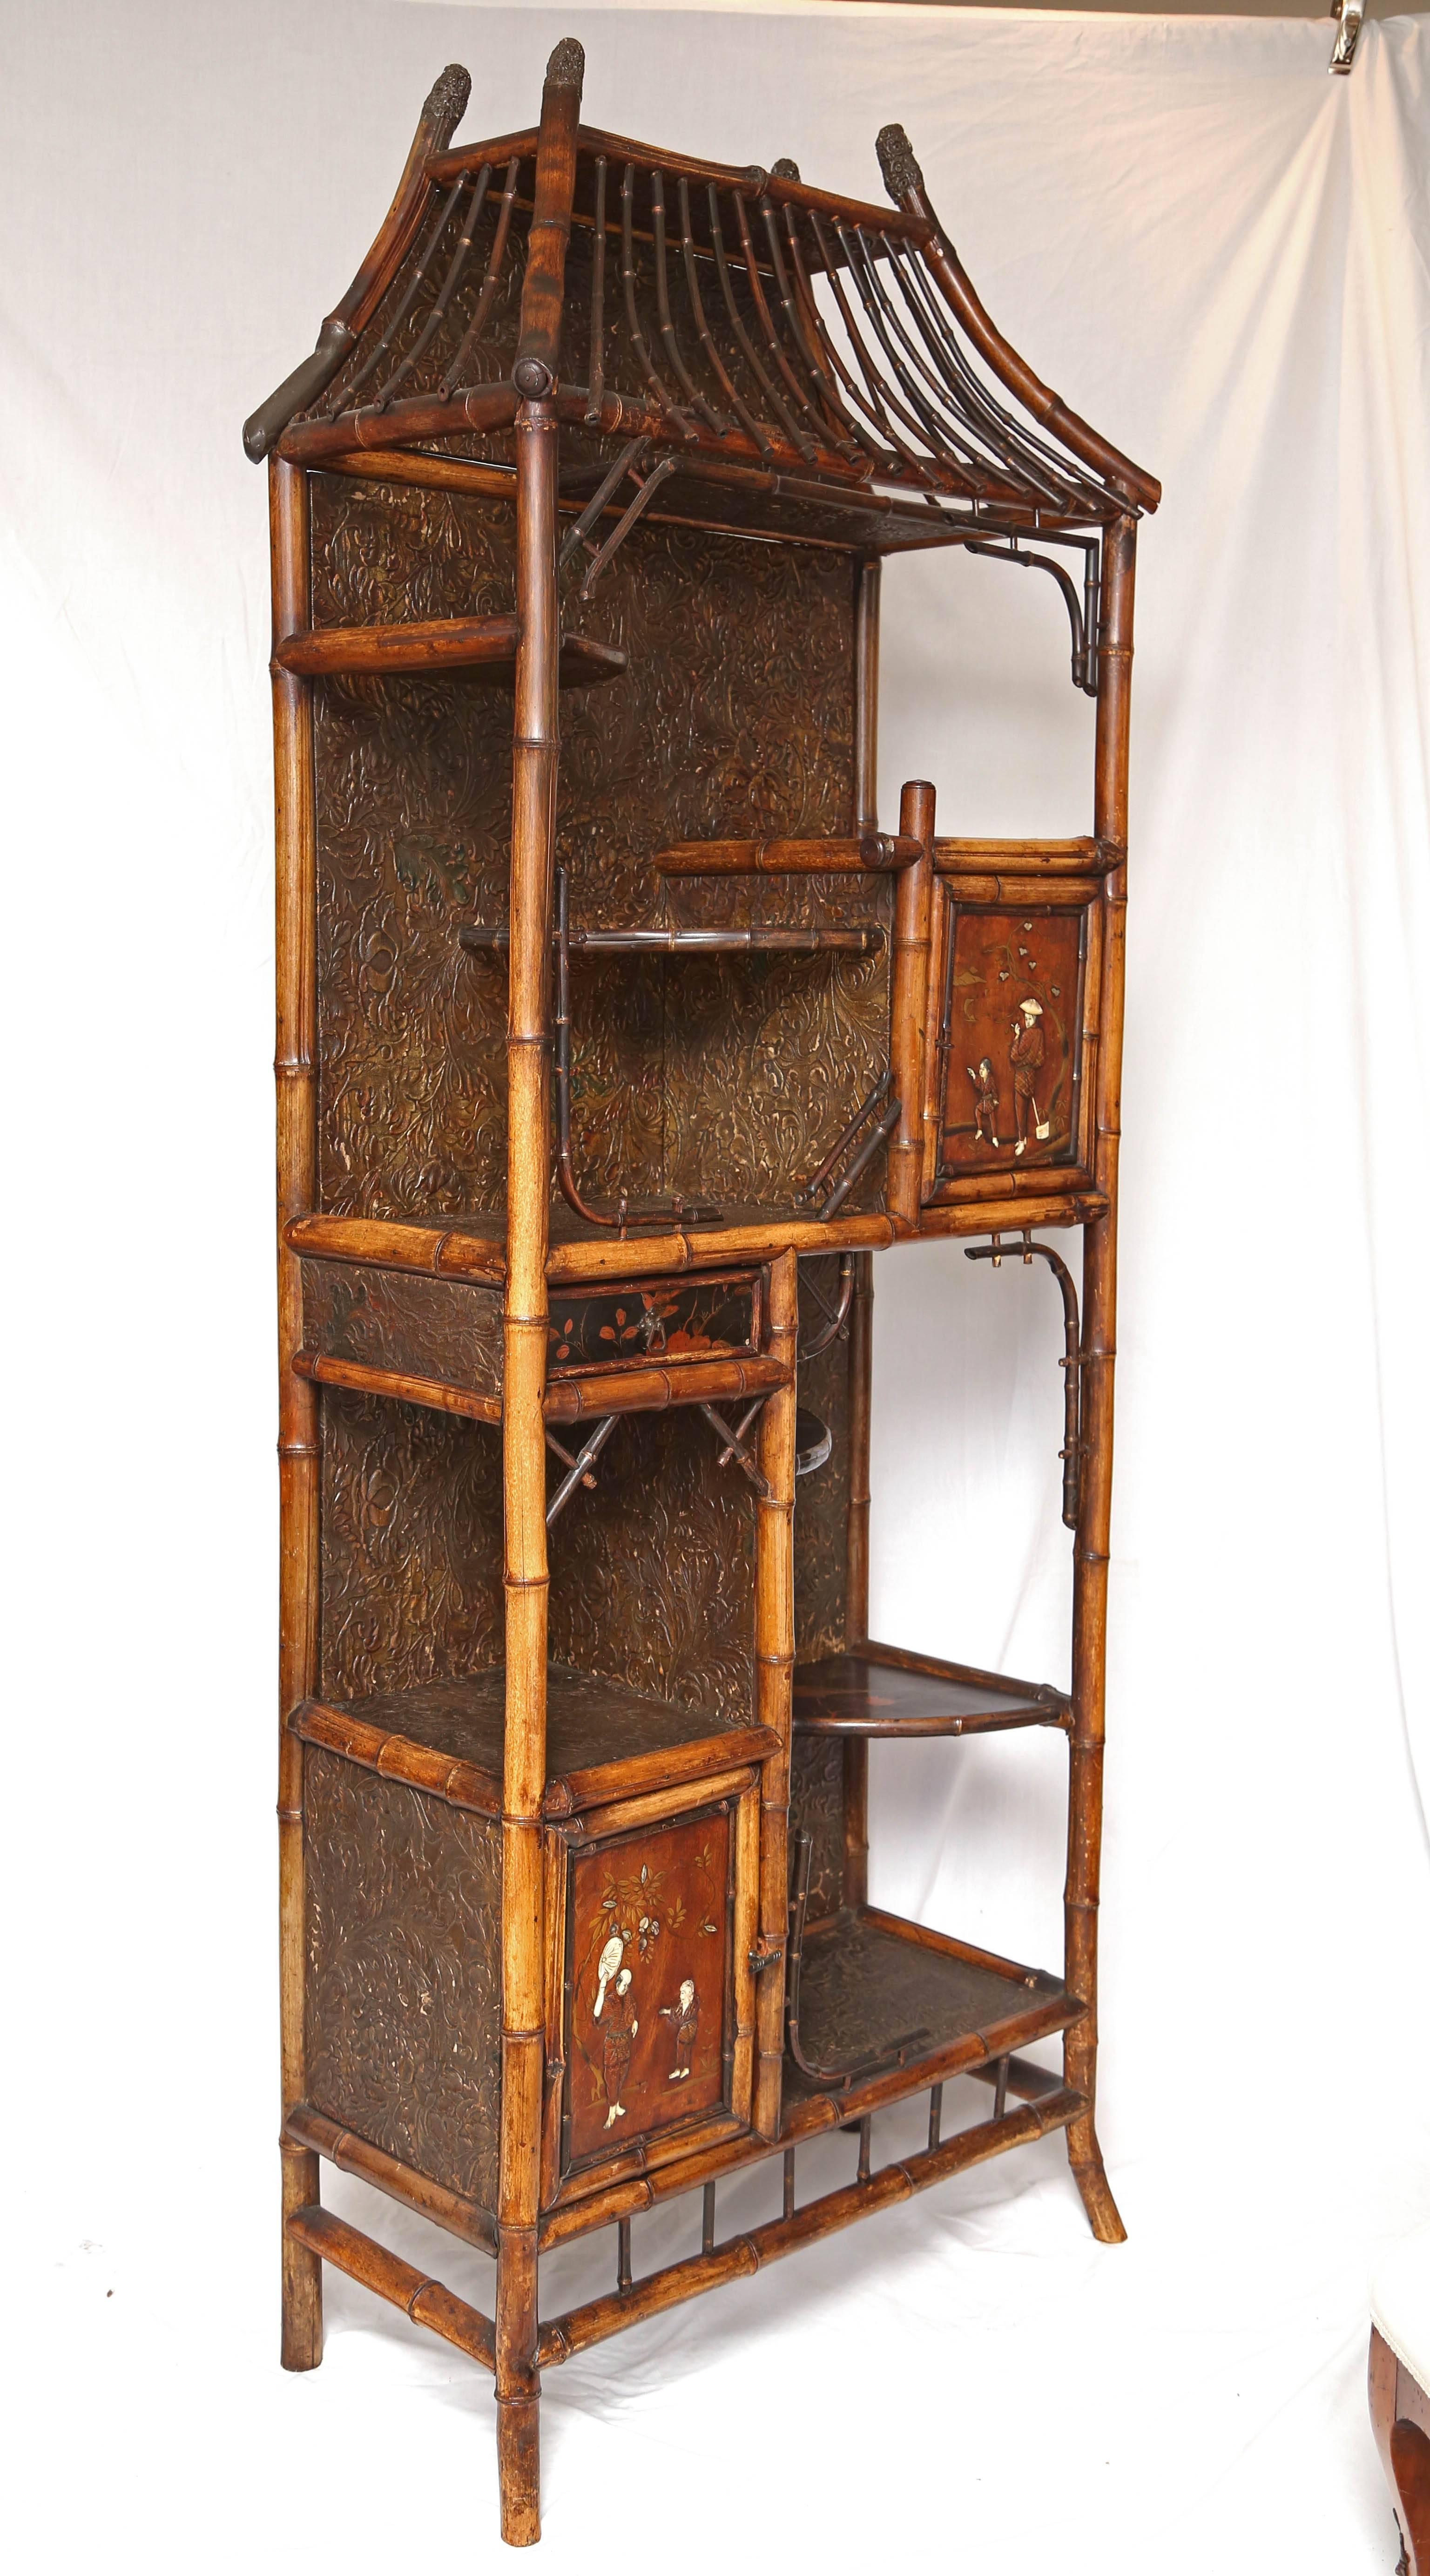 Superb 19th century English Japanese bamboo étagère recover with leather paper, carved doors and lacquer shelves.
This is truly a Museum piece!